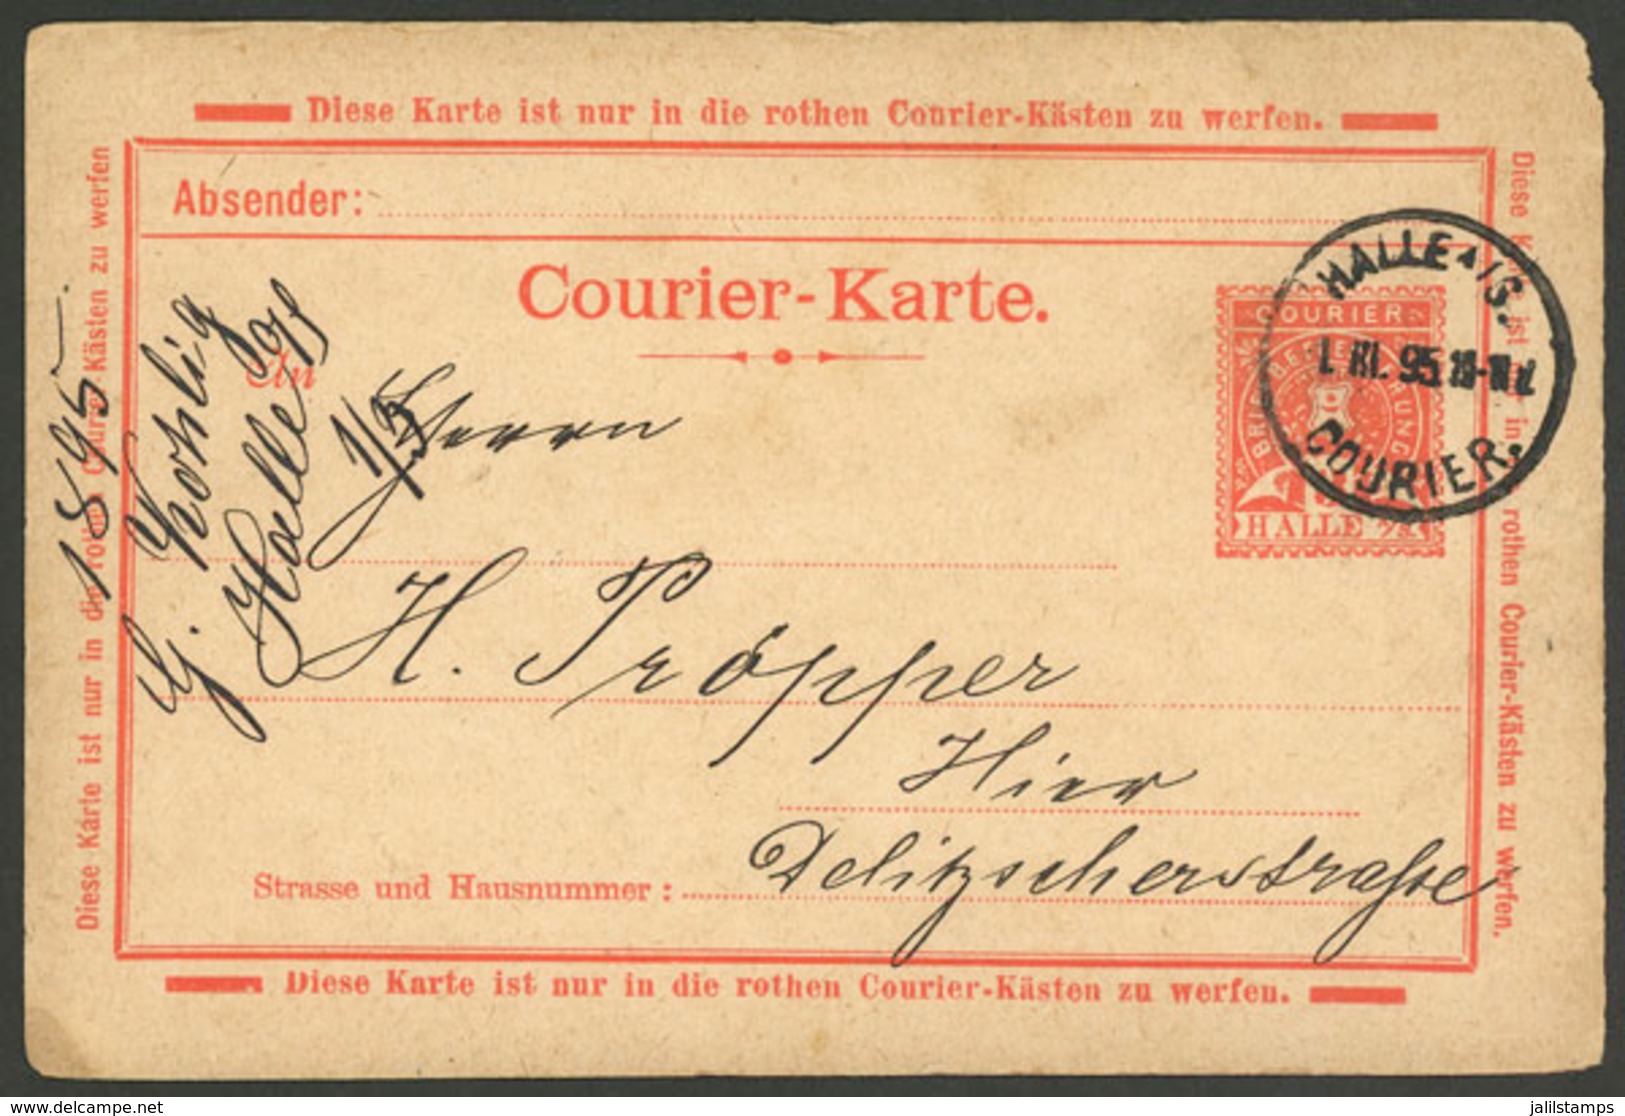 GERMANY: Postal Card Of Private Post Used In Halle On 1/MAR/1895, VF And Attractive! - Storia Postale